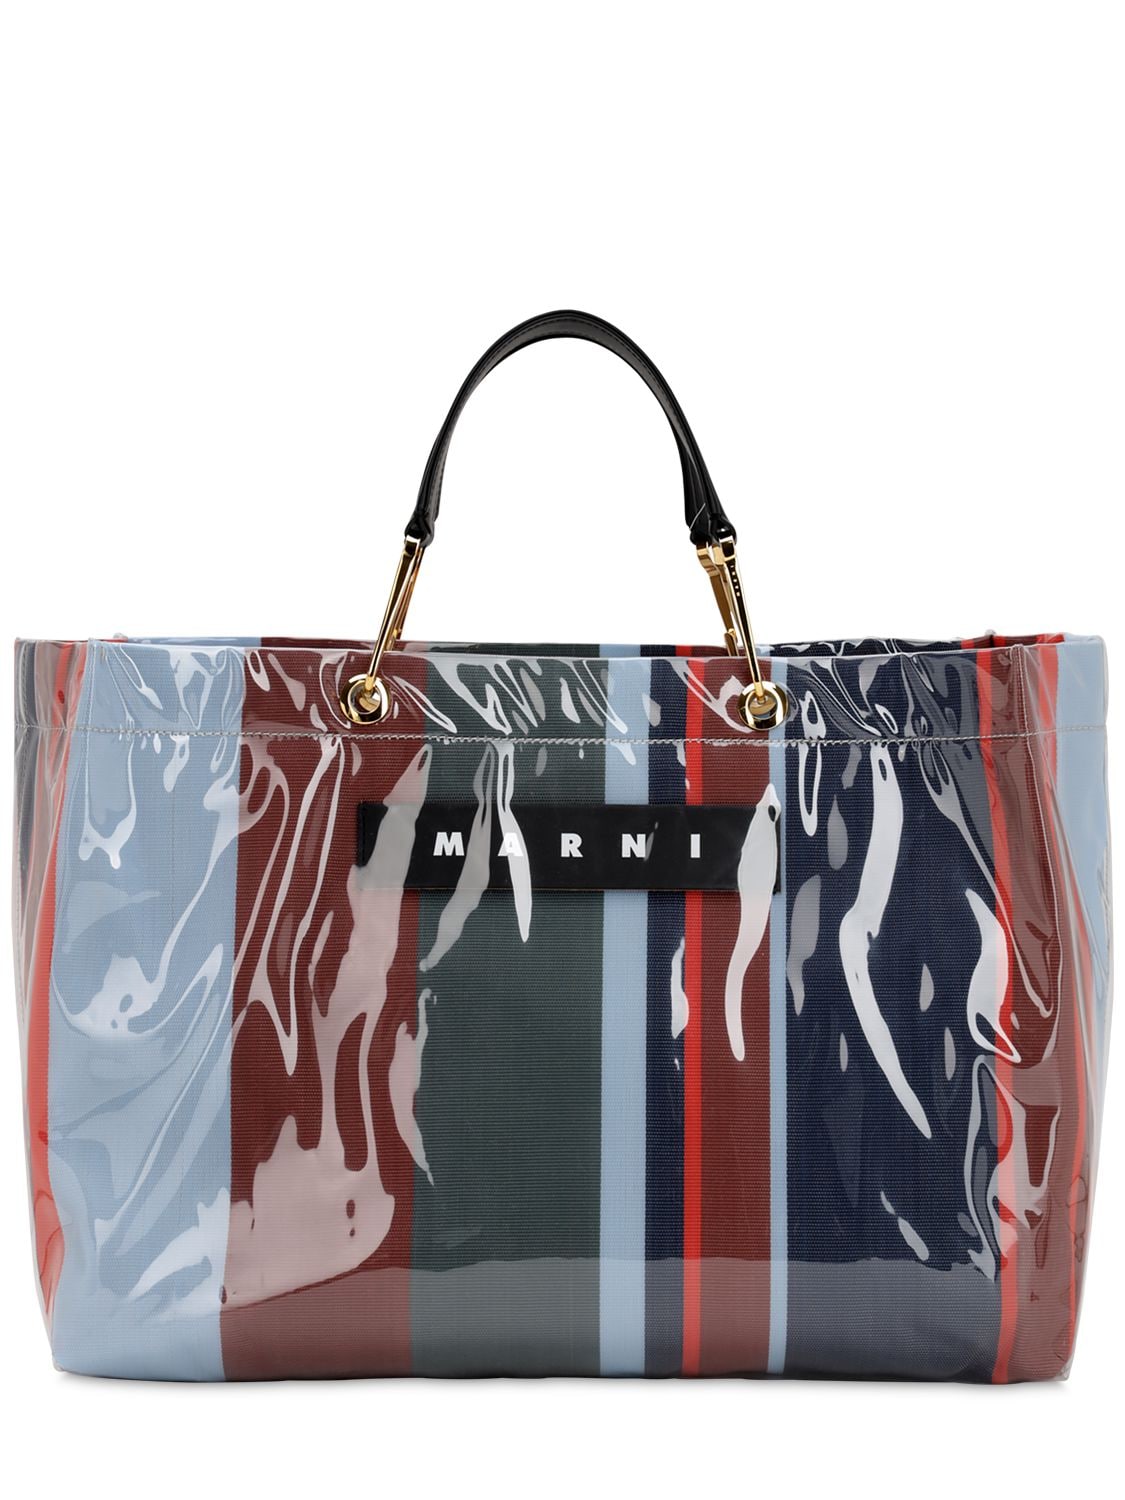 Marni Glossy Grip Large Square Tote Bag In Lacquer